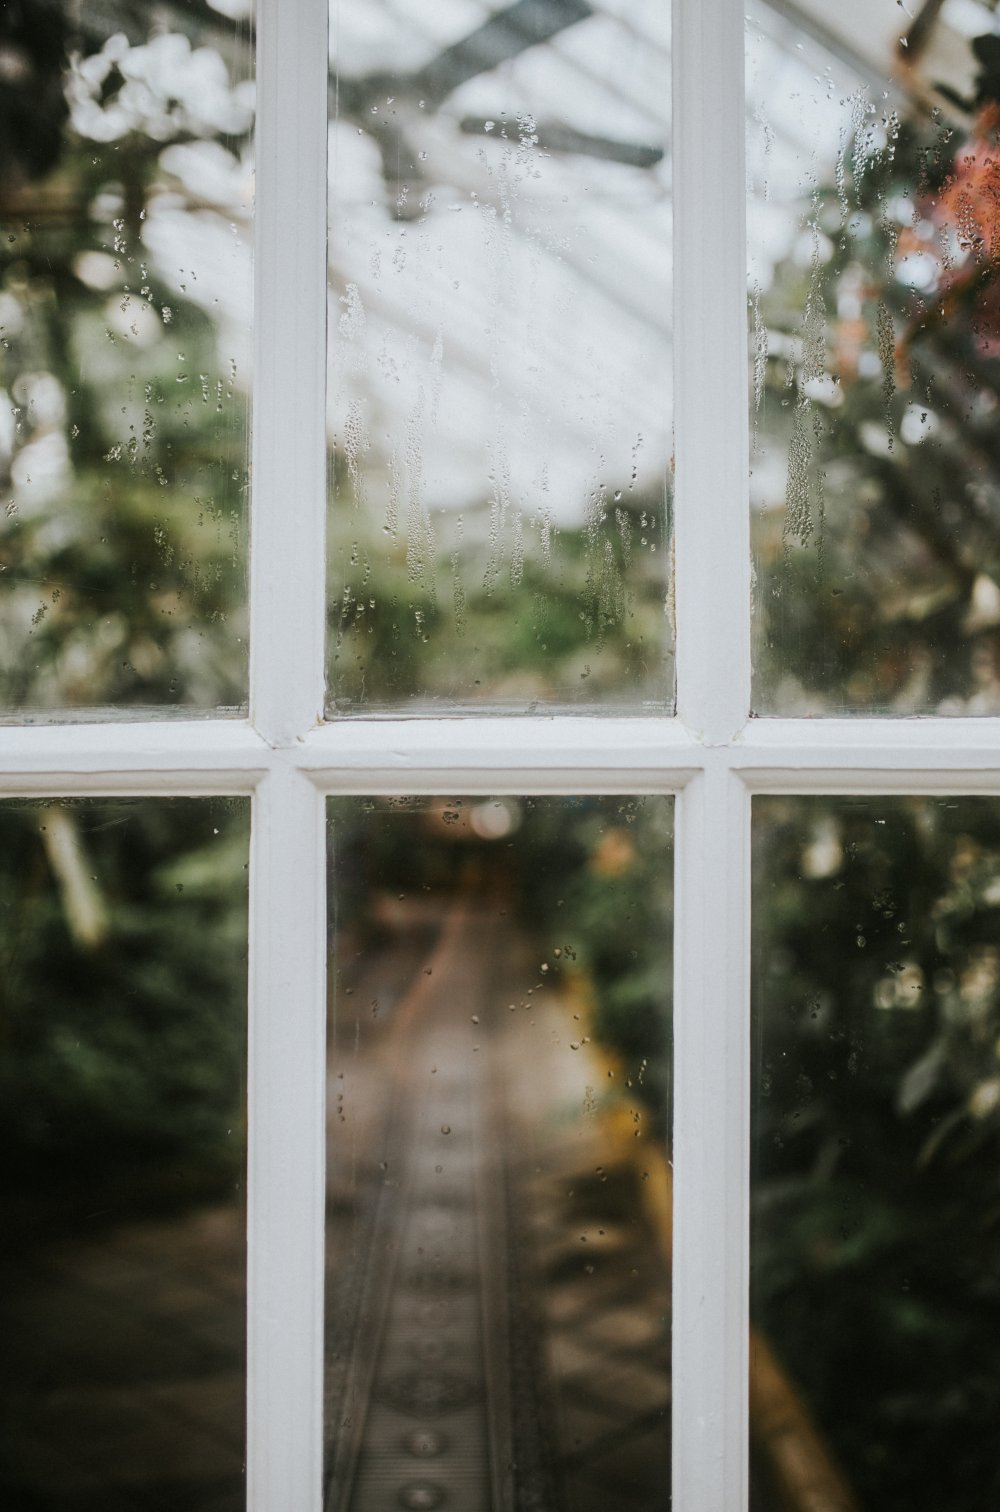 Cheap Windows - Four Tips To Get The Best Double Glazed Windows At Affordable Rates